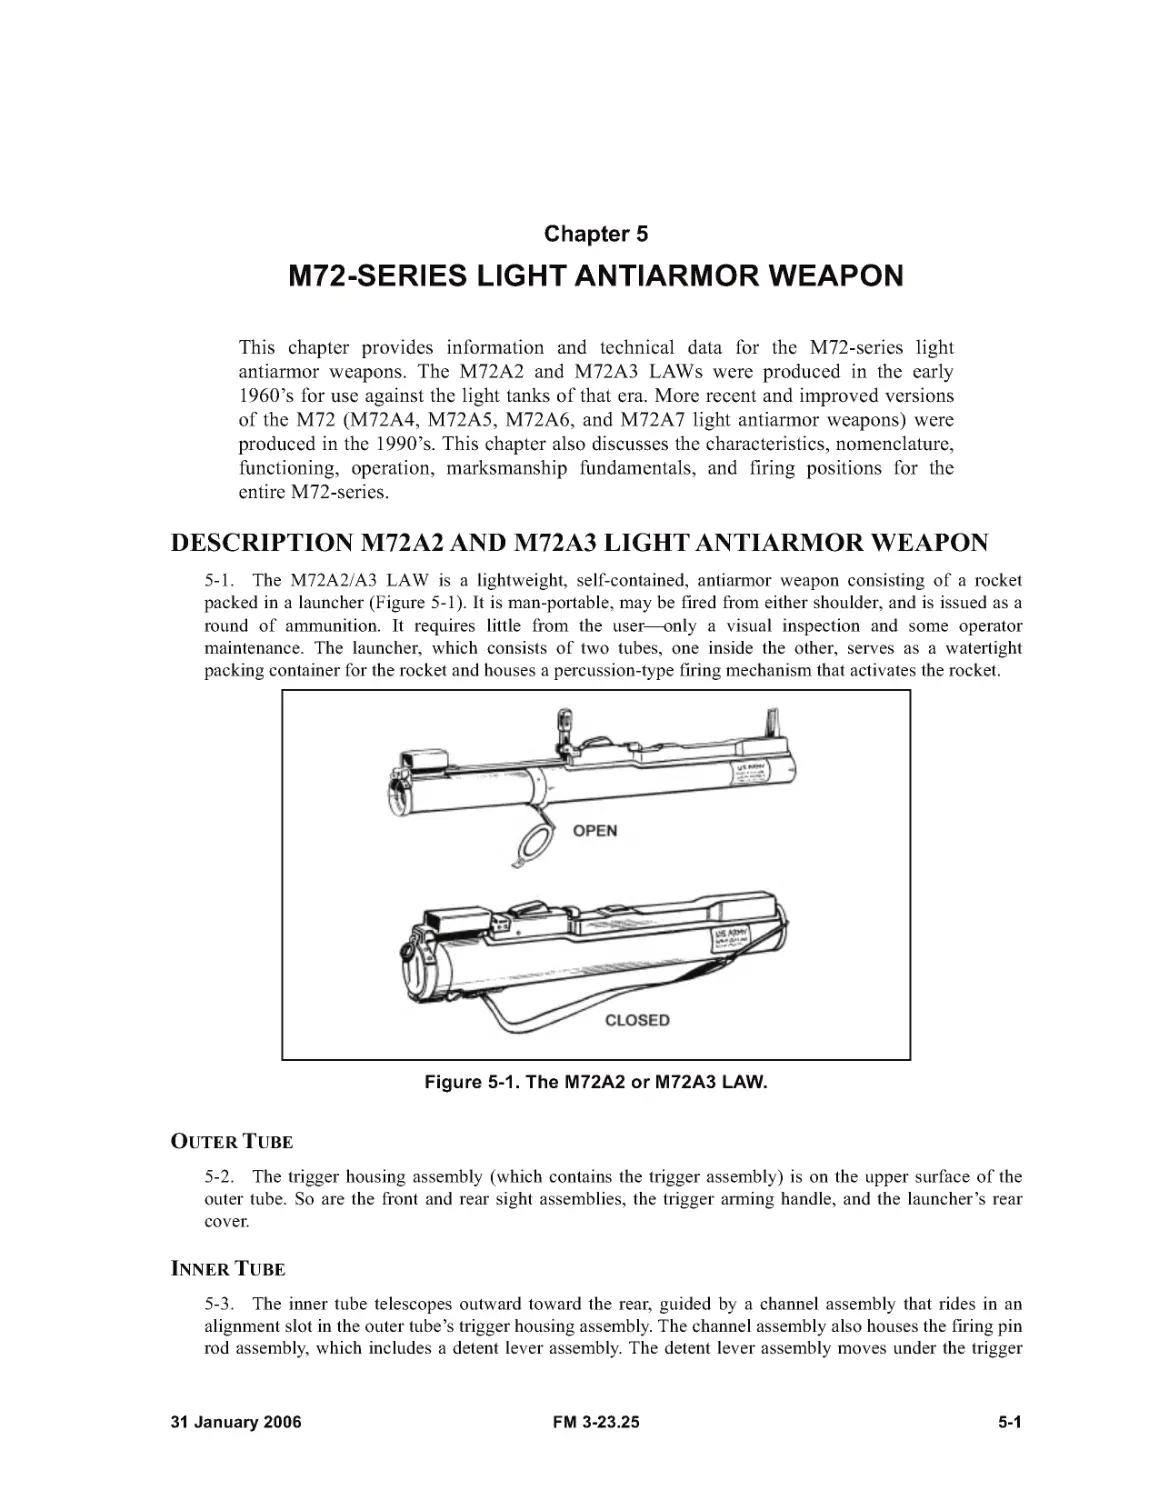 Figure 5-1. The M72A2 or M72A3 LAW.
Chapter 5 - M72-SERIES LIGHT ANTIARMOR WEAPON